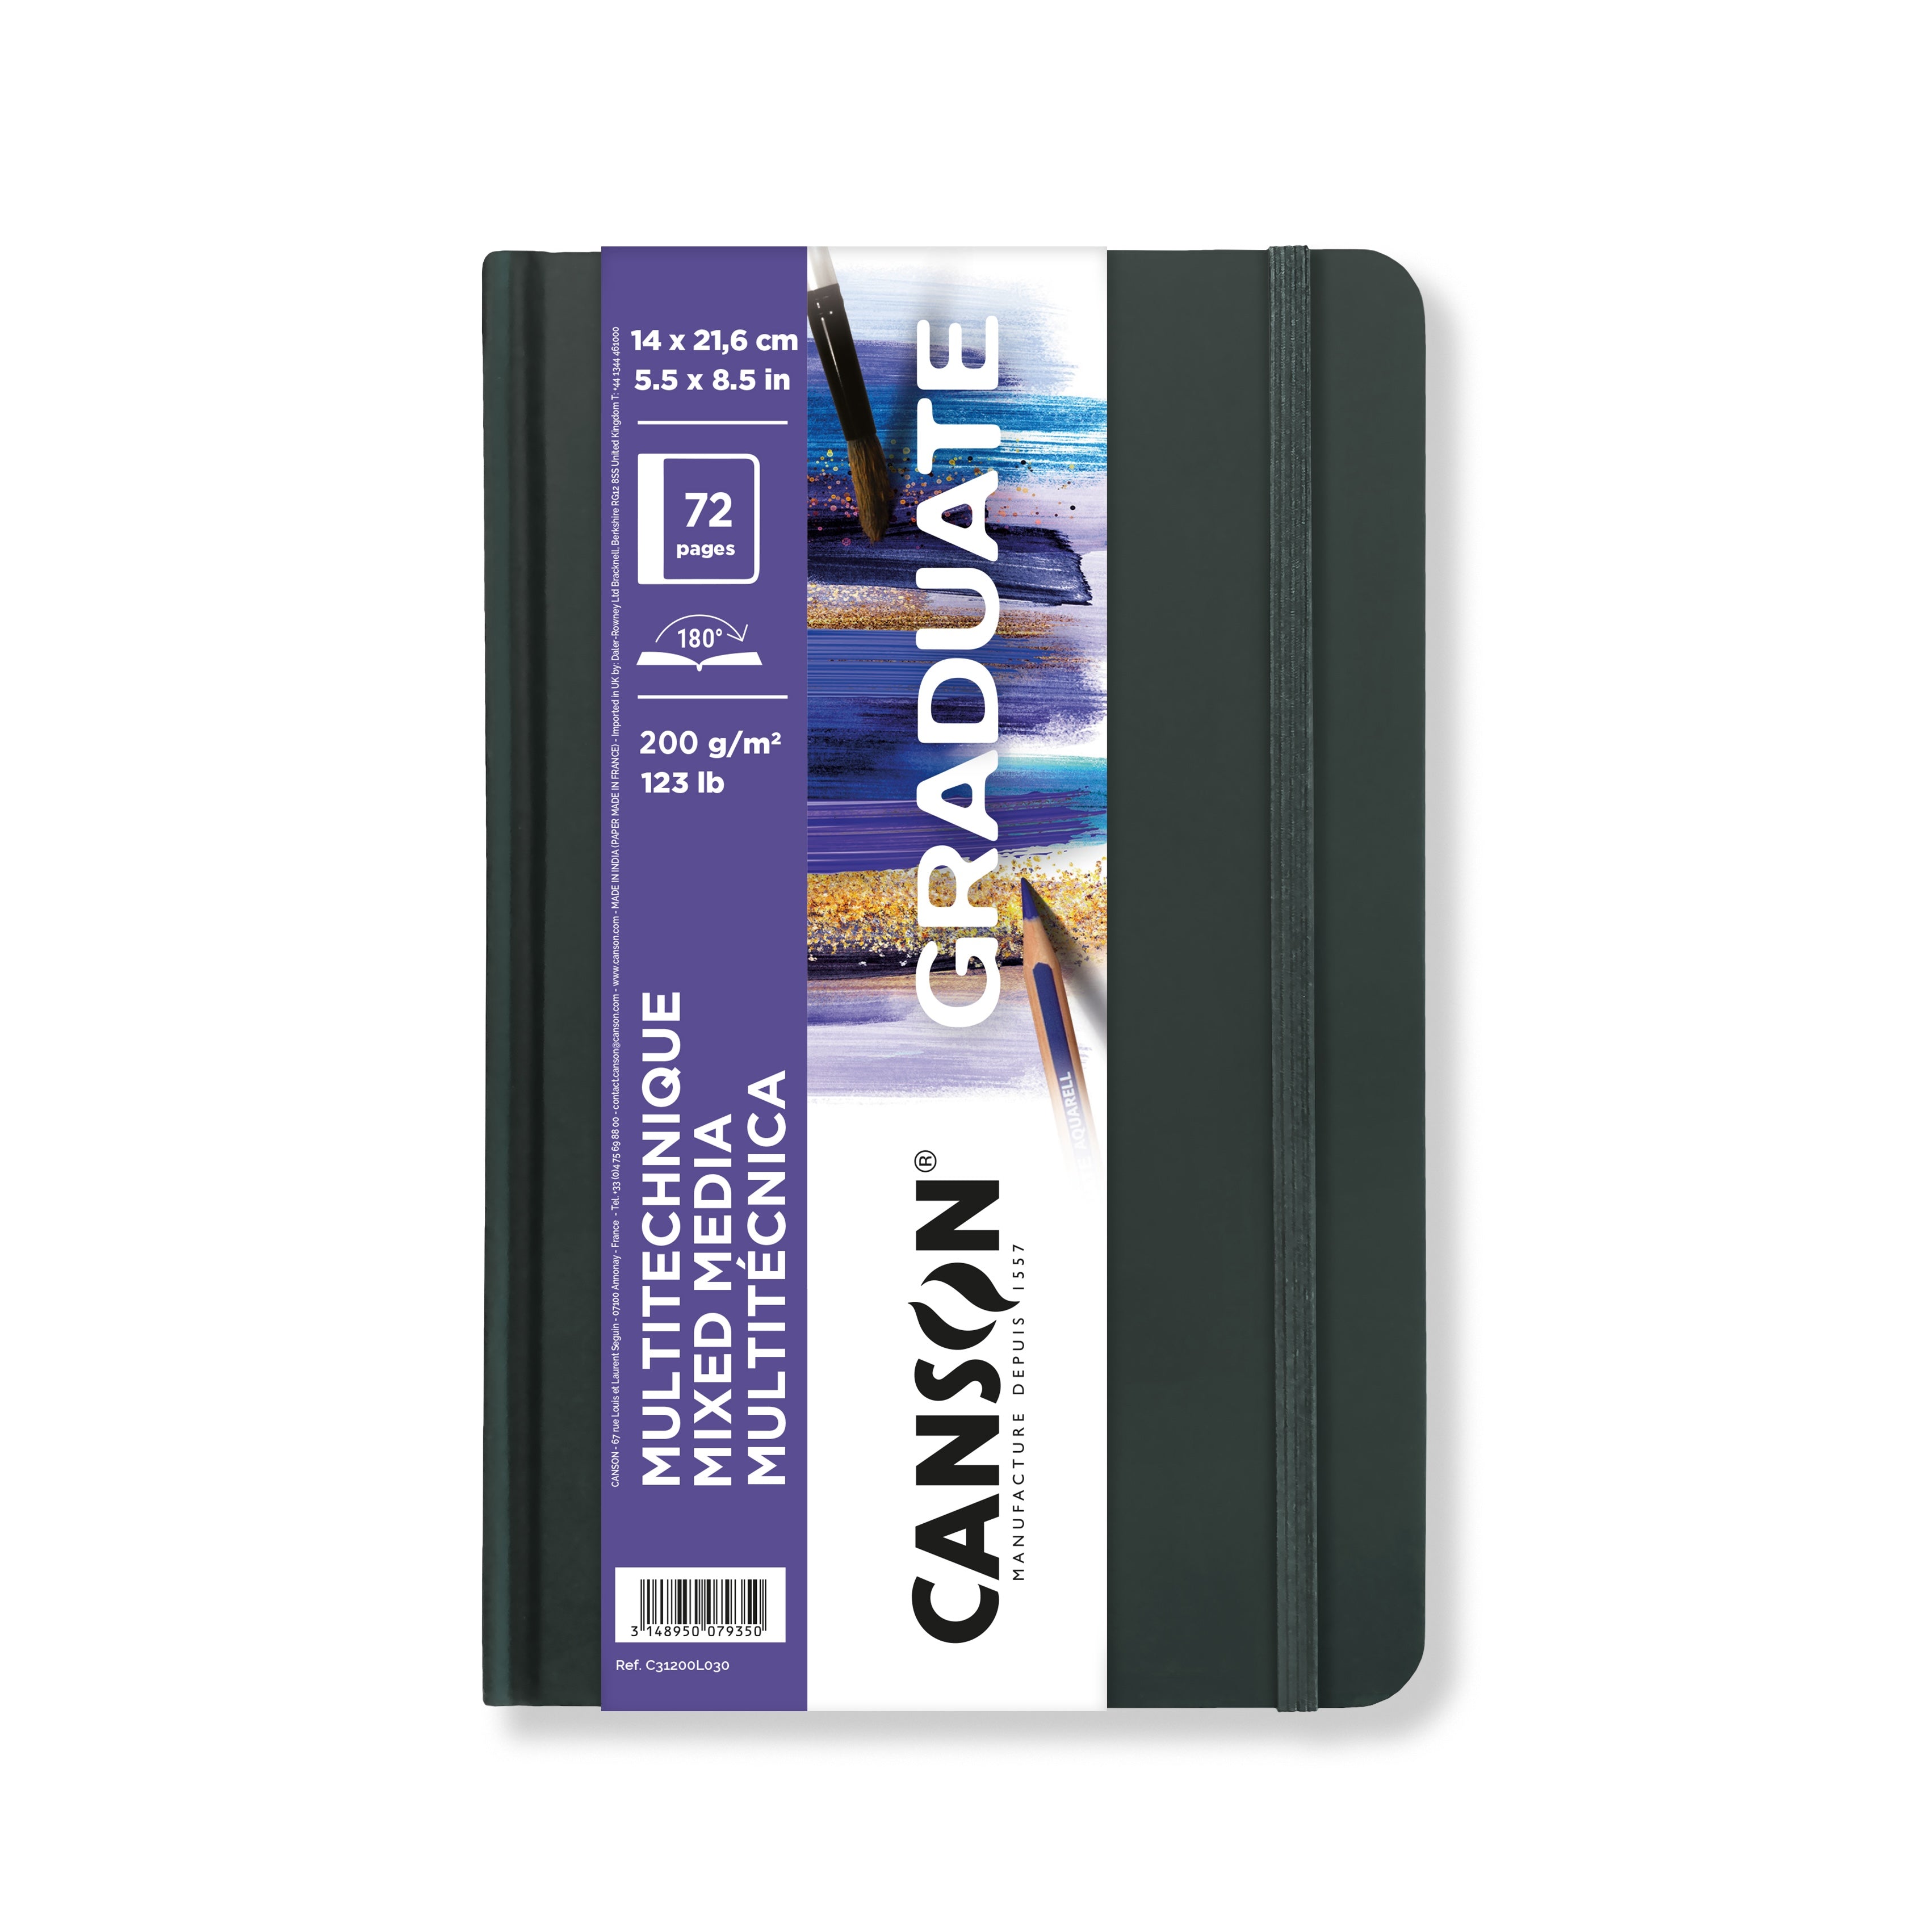 Canson® Artist Series Mixed Media Pad